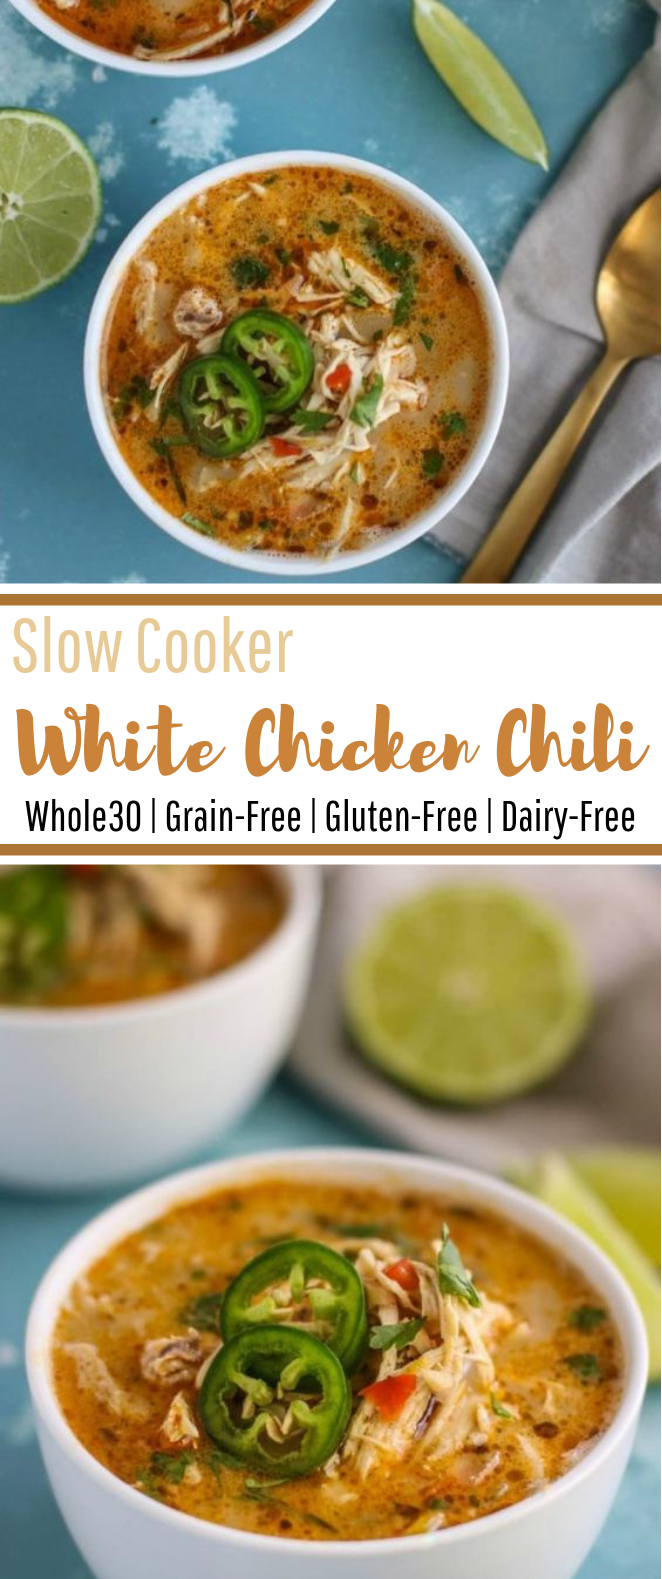 Slow Cooker White Chicken Chili #healthy #lowcarb